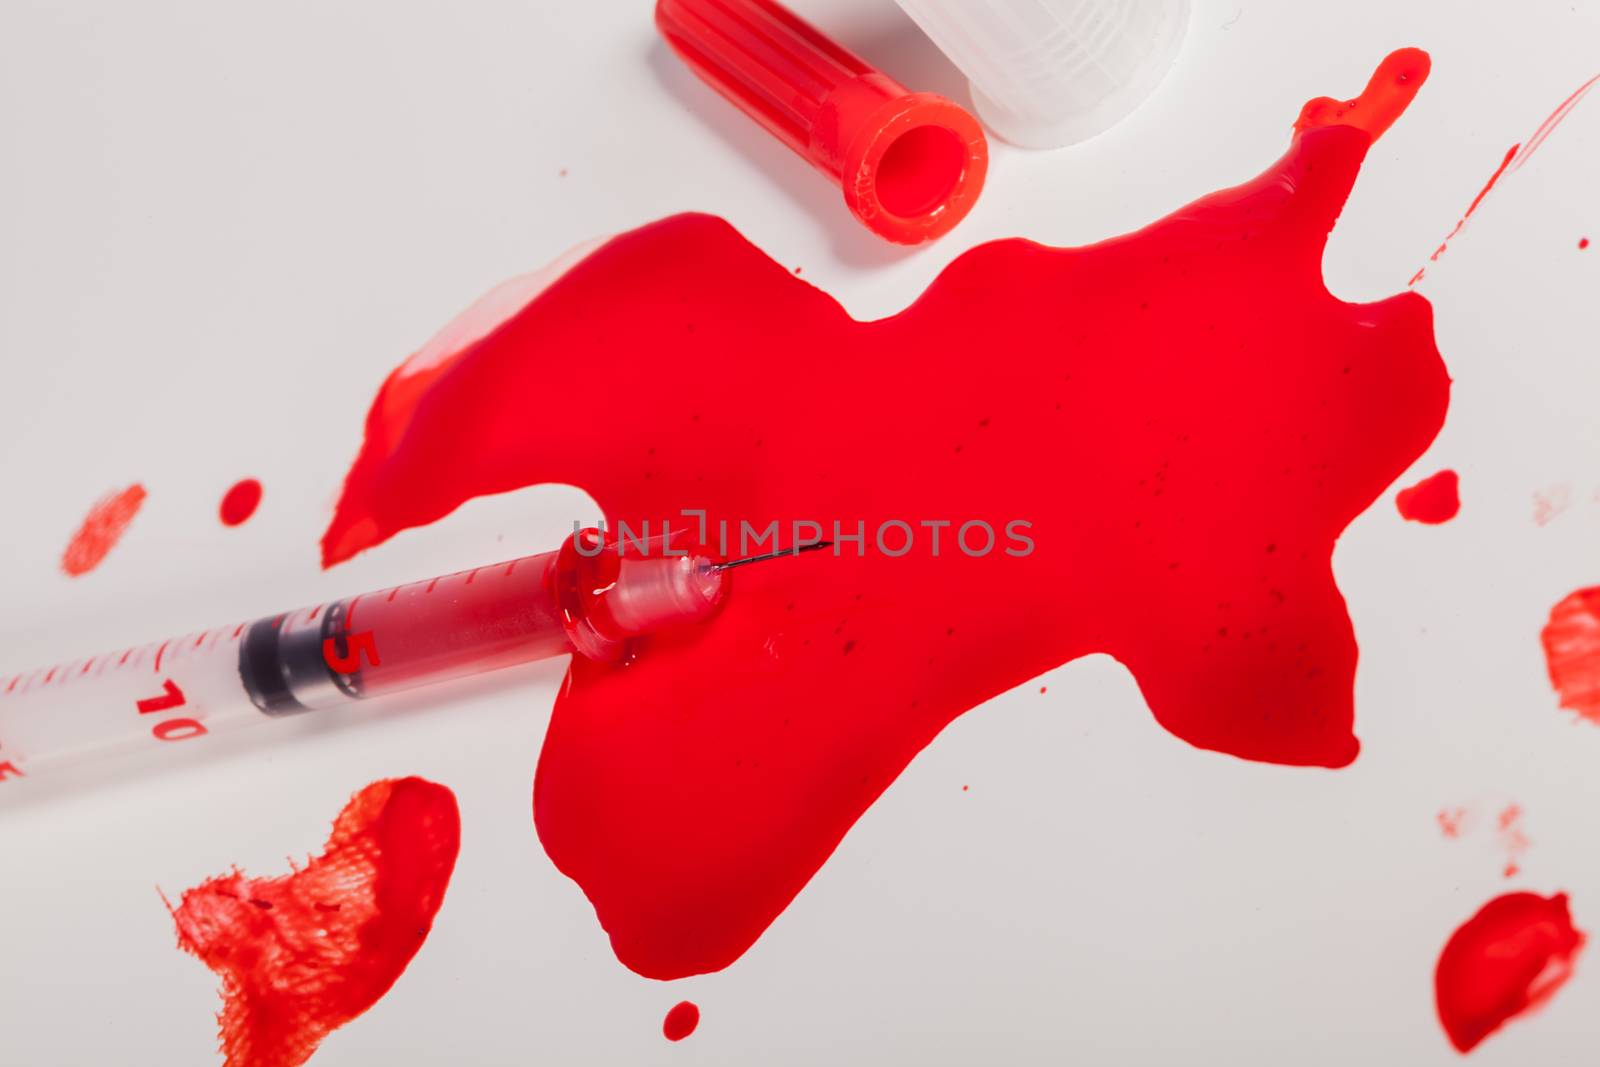 Syringe Squirting Red Blood onto White Background by juniart